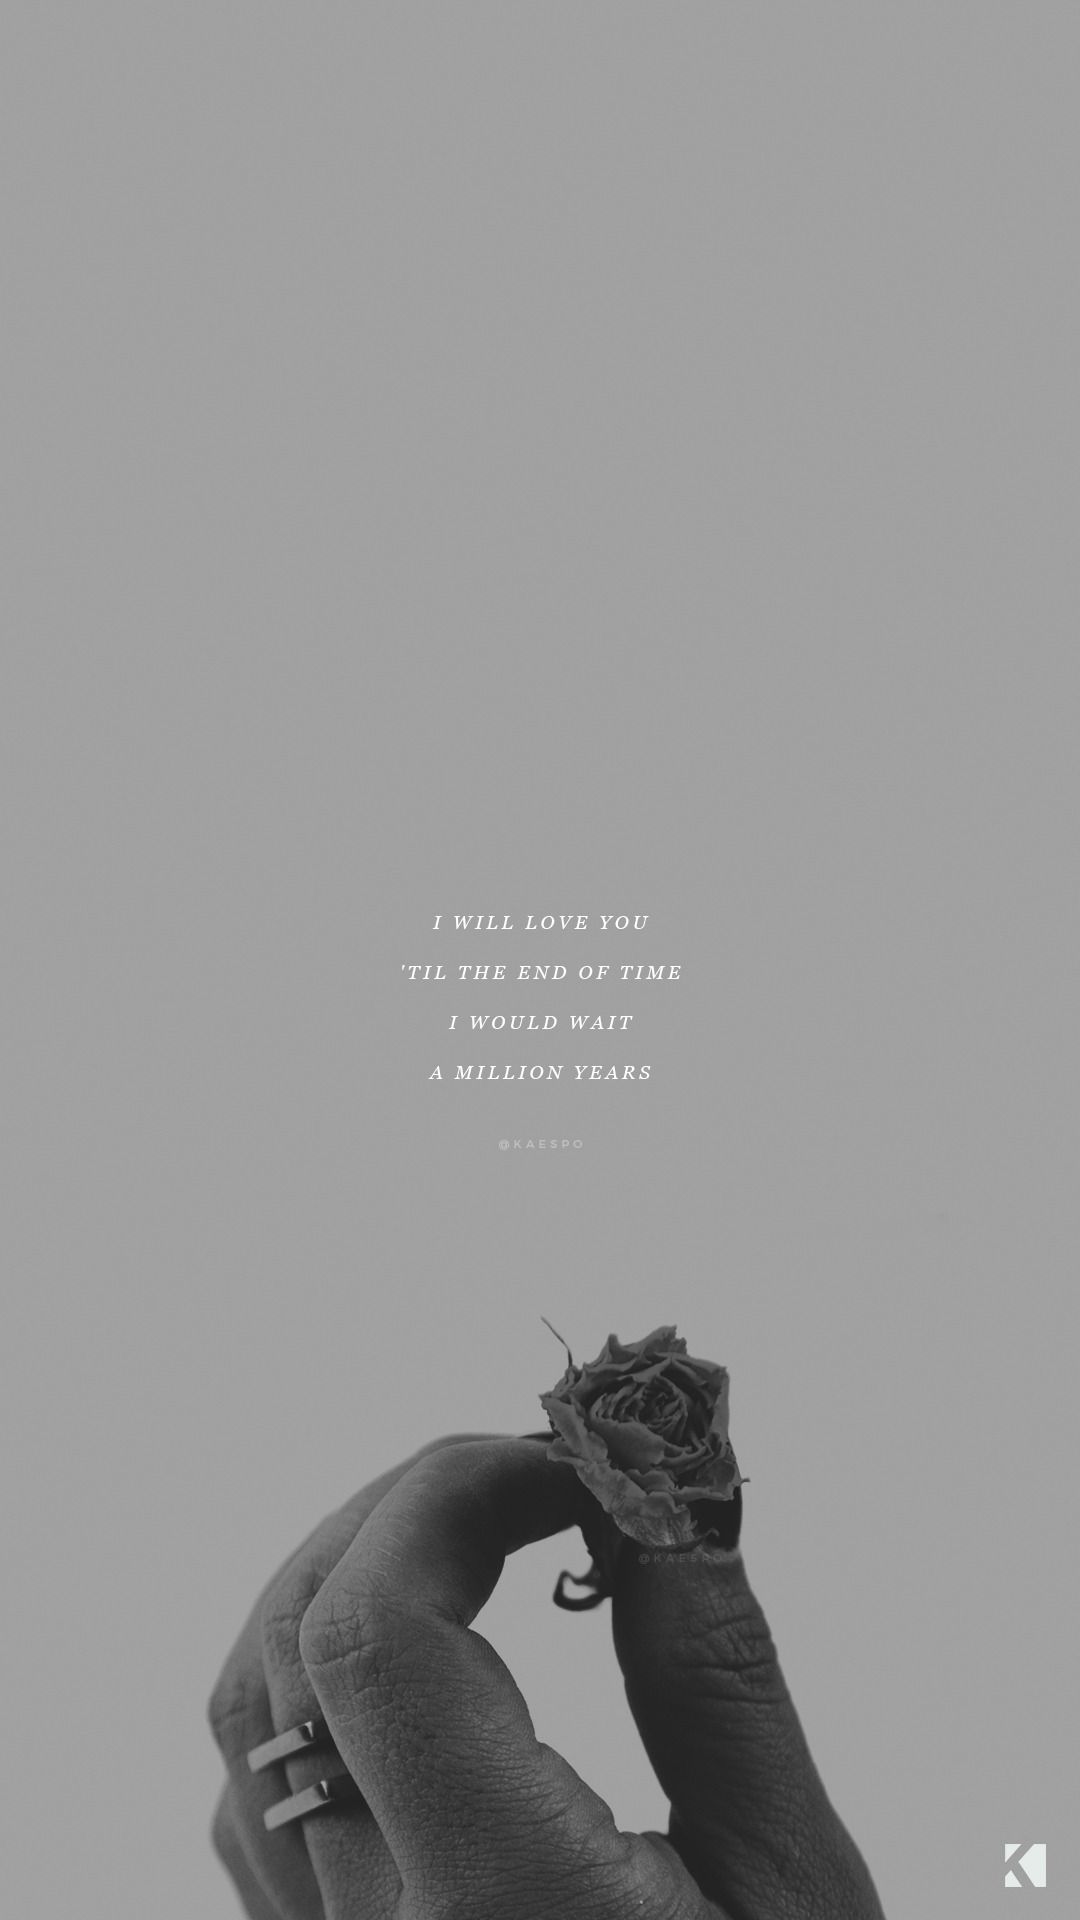 IPhone wallpaper of a person holding a dried rose with the lyrics 